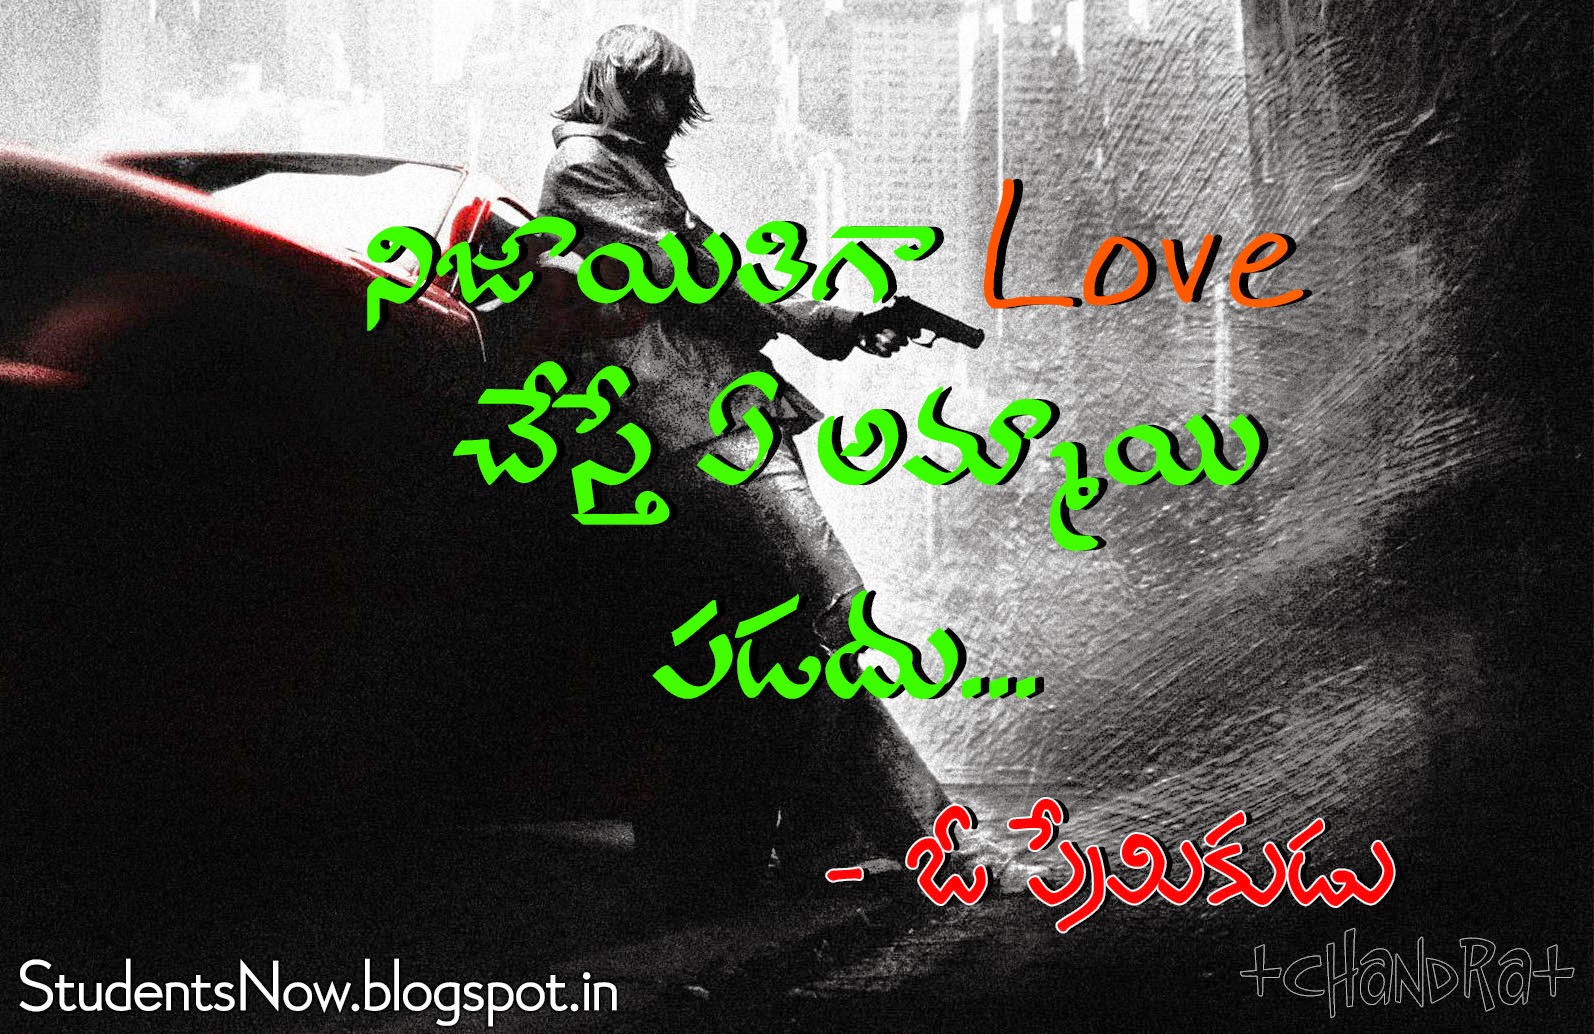 TELUGU FUNNY QUOTES AND IMAGES